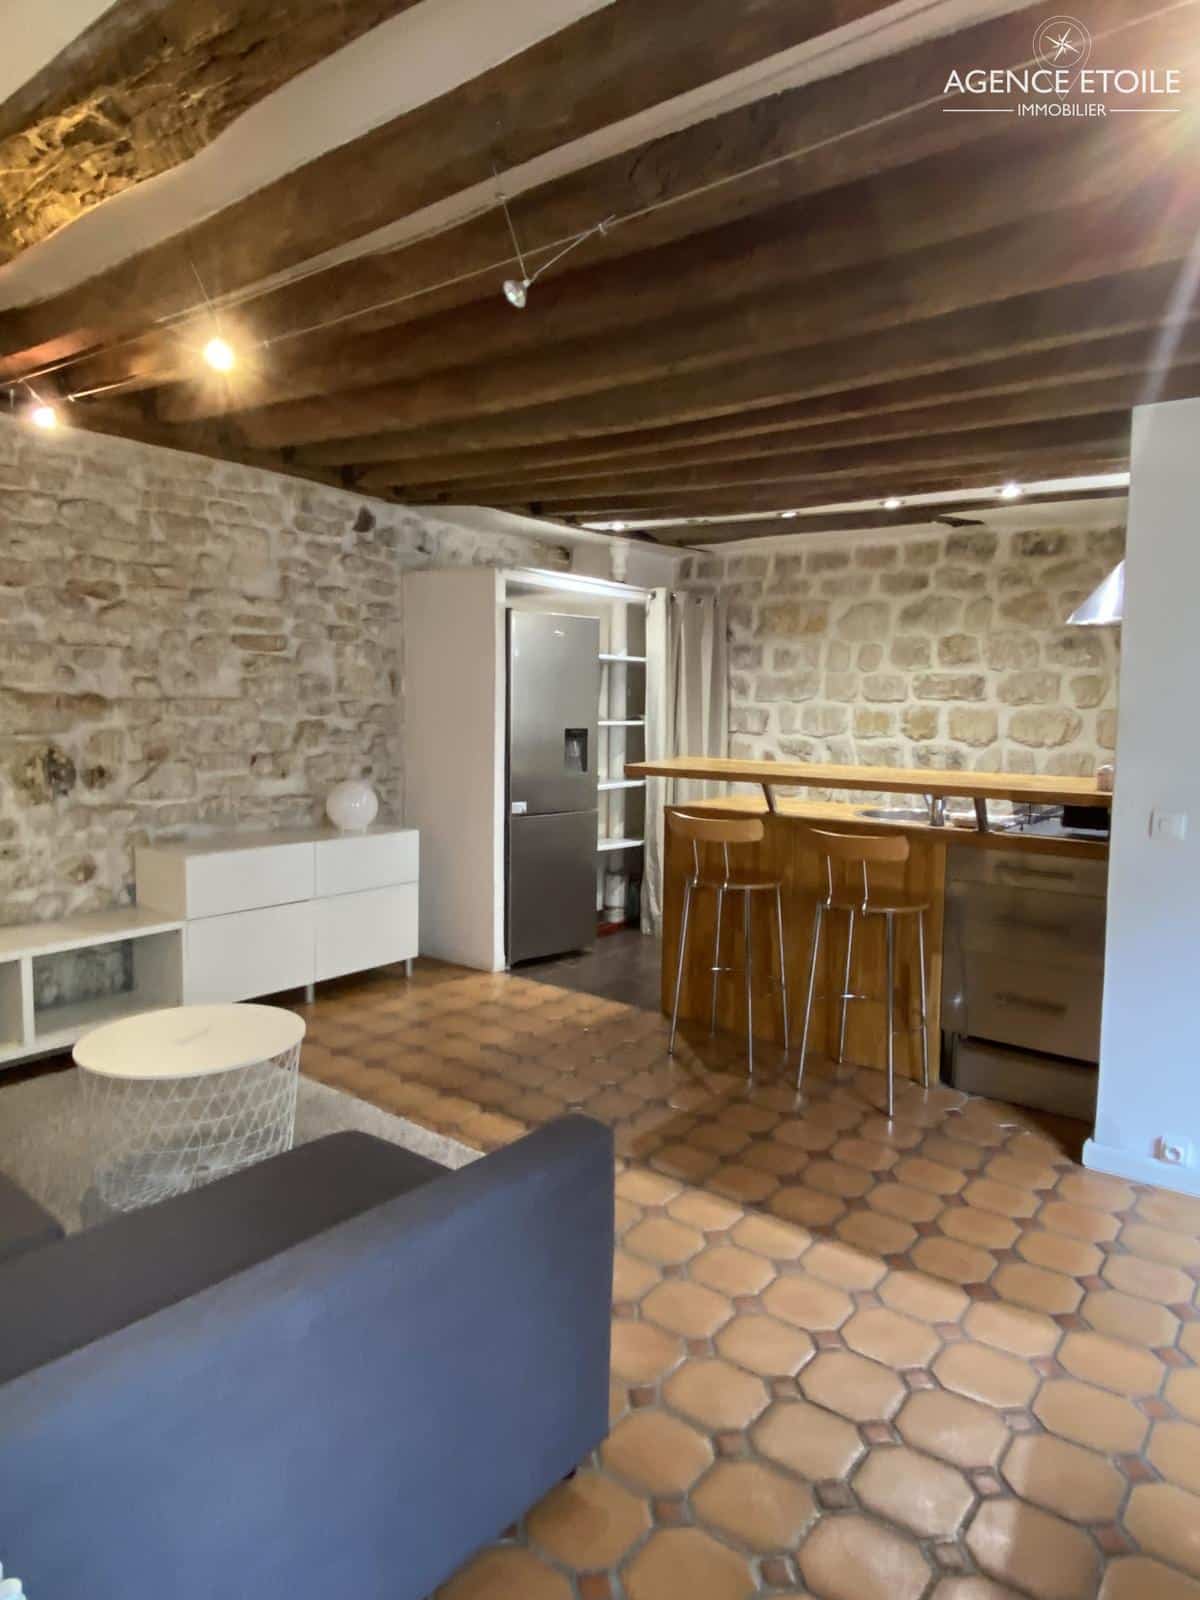 3rd RUE DE MONTMORENCY: TWO ROOMS FOR SALE